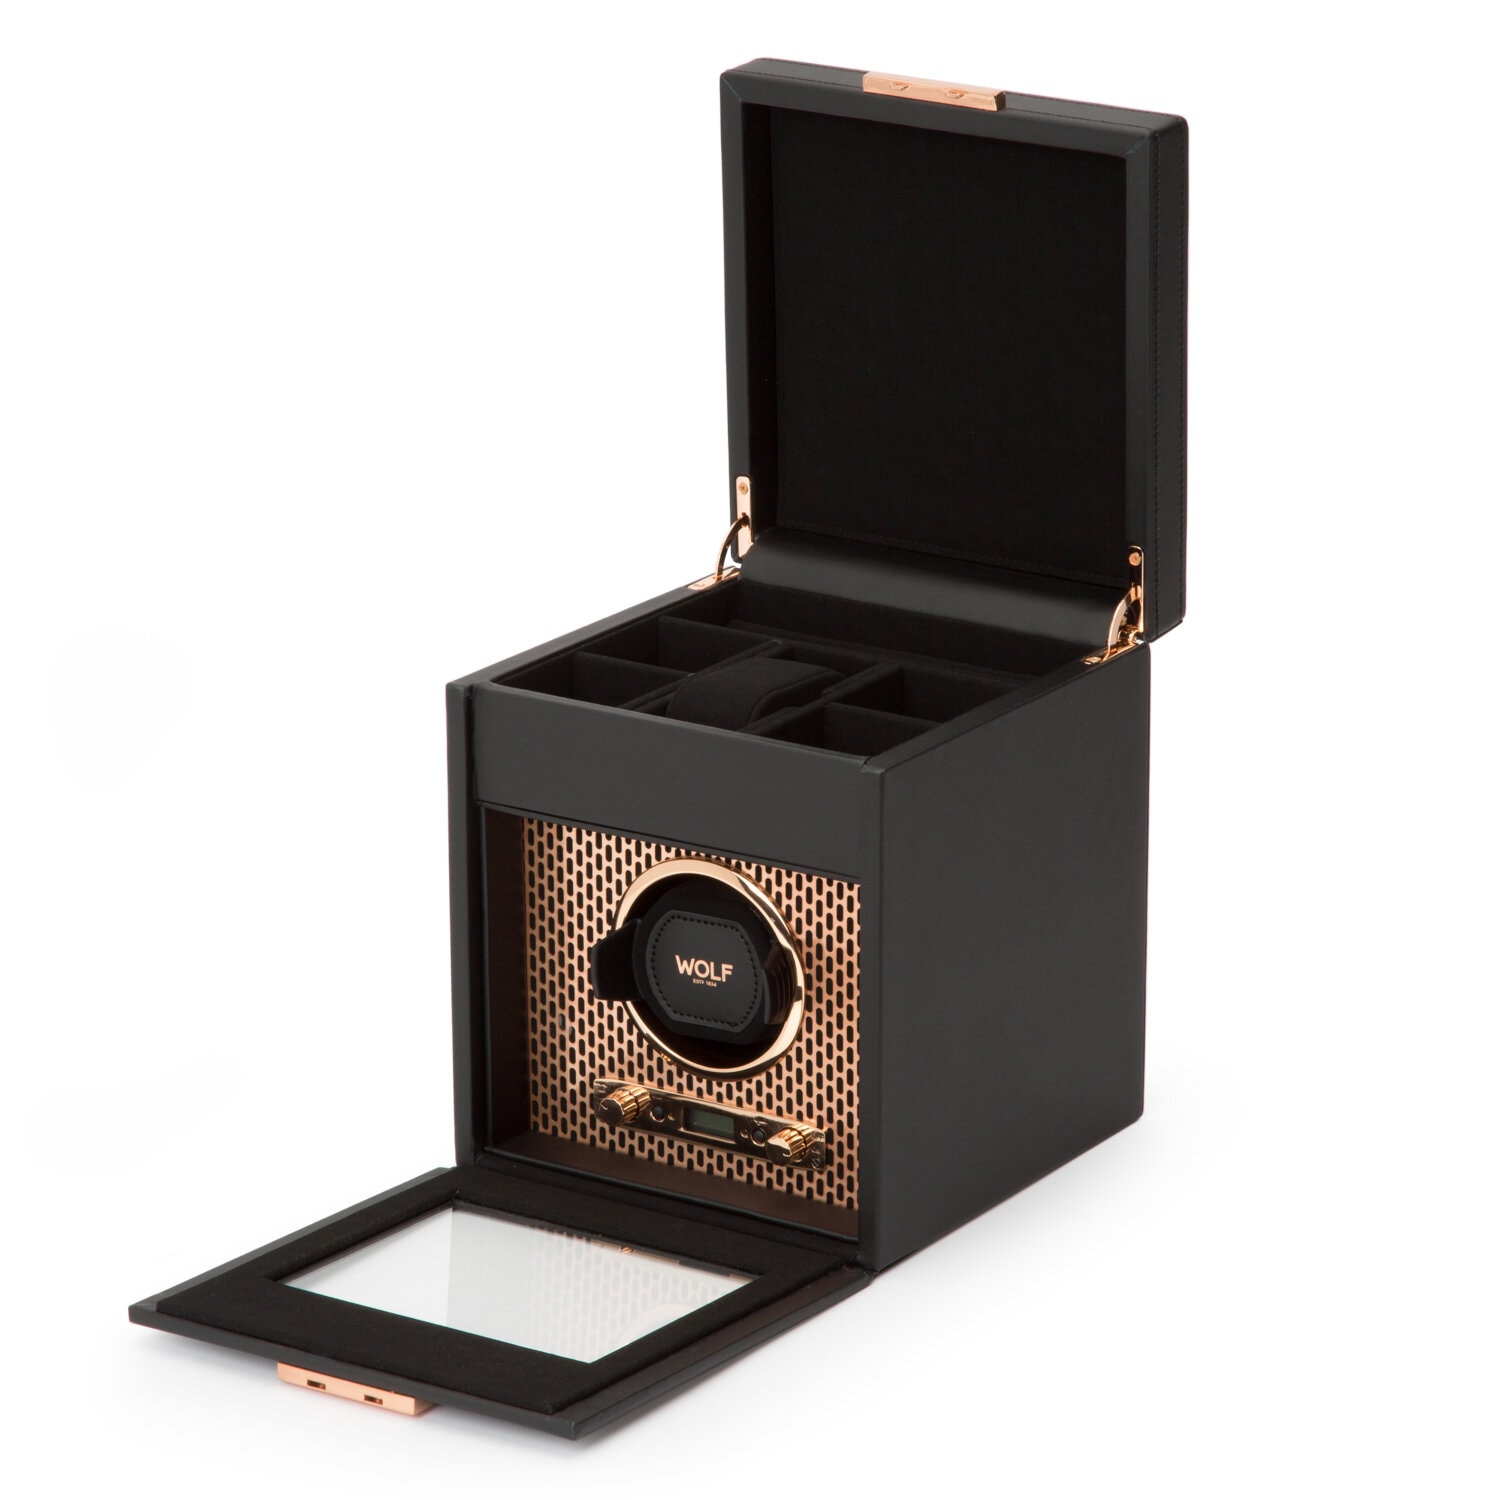 WOLF Axis Single Watch Winder with Storage